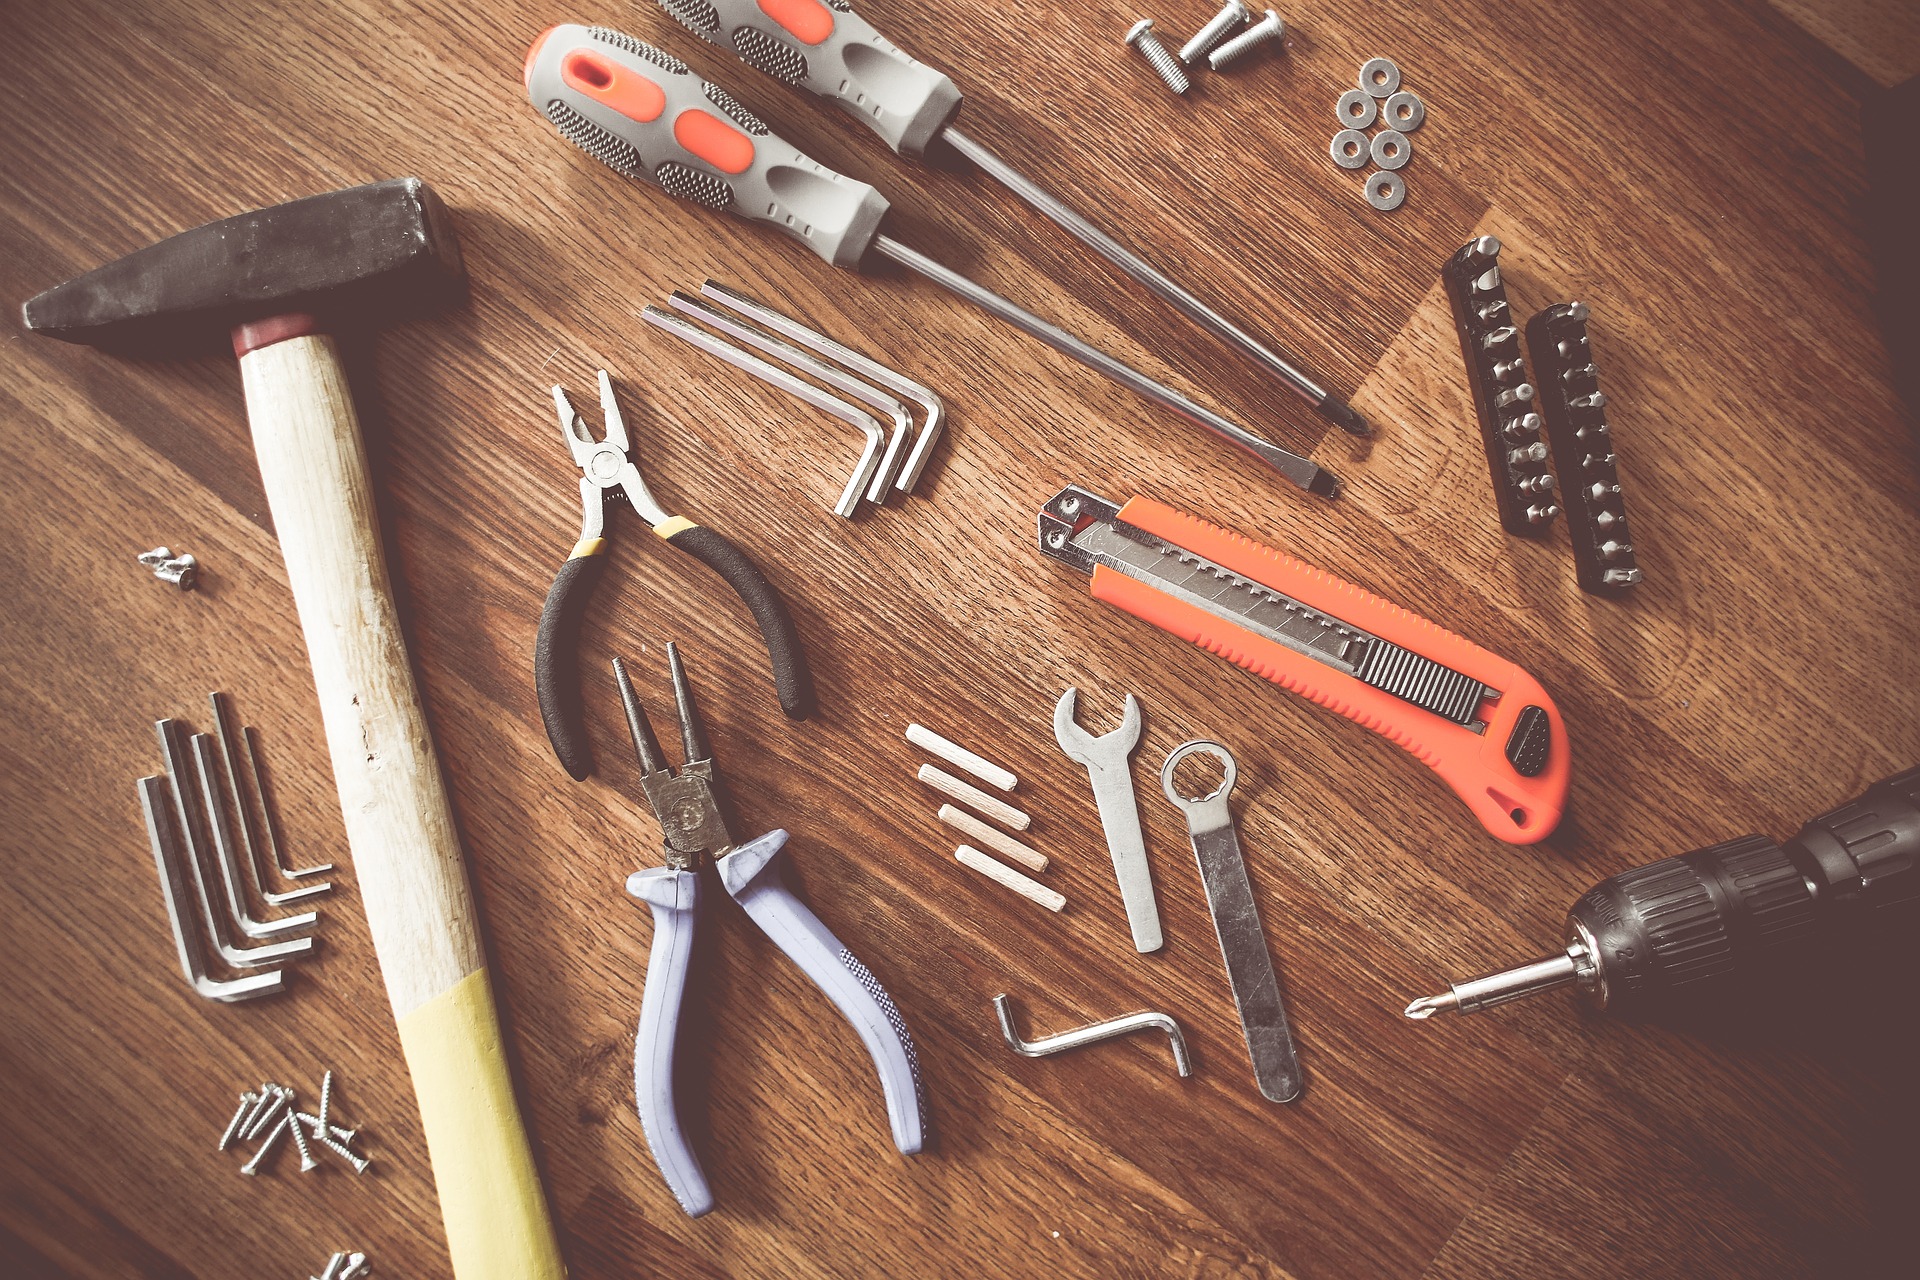 Tools to Build a Better Economy